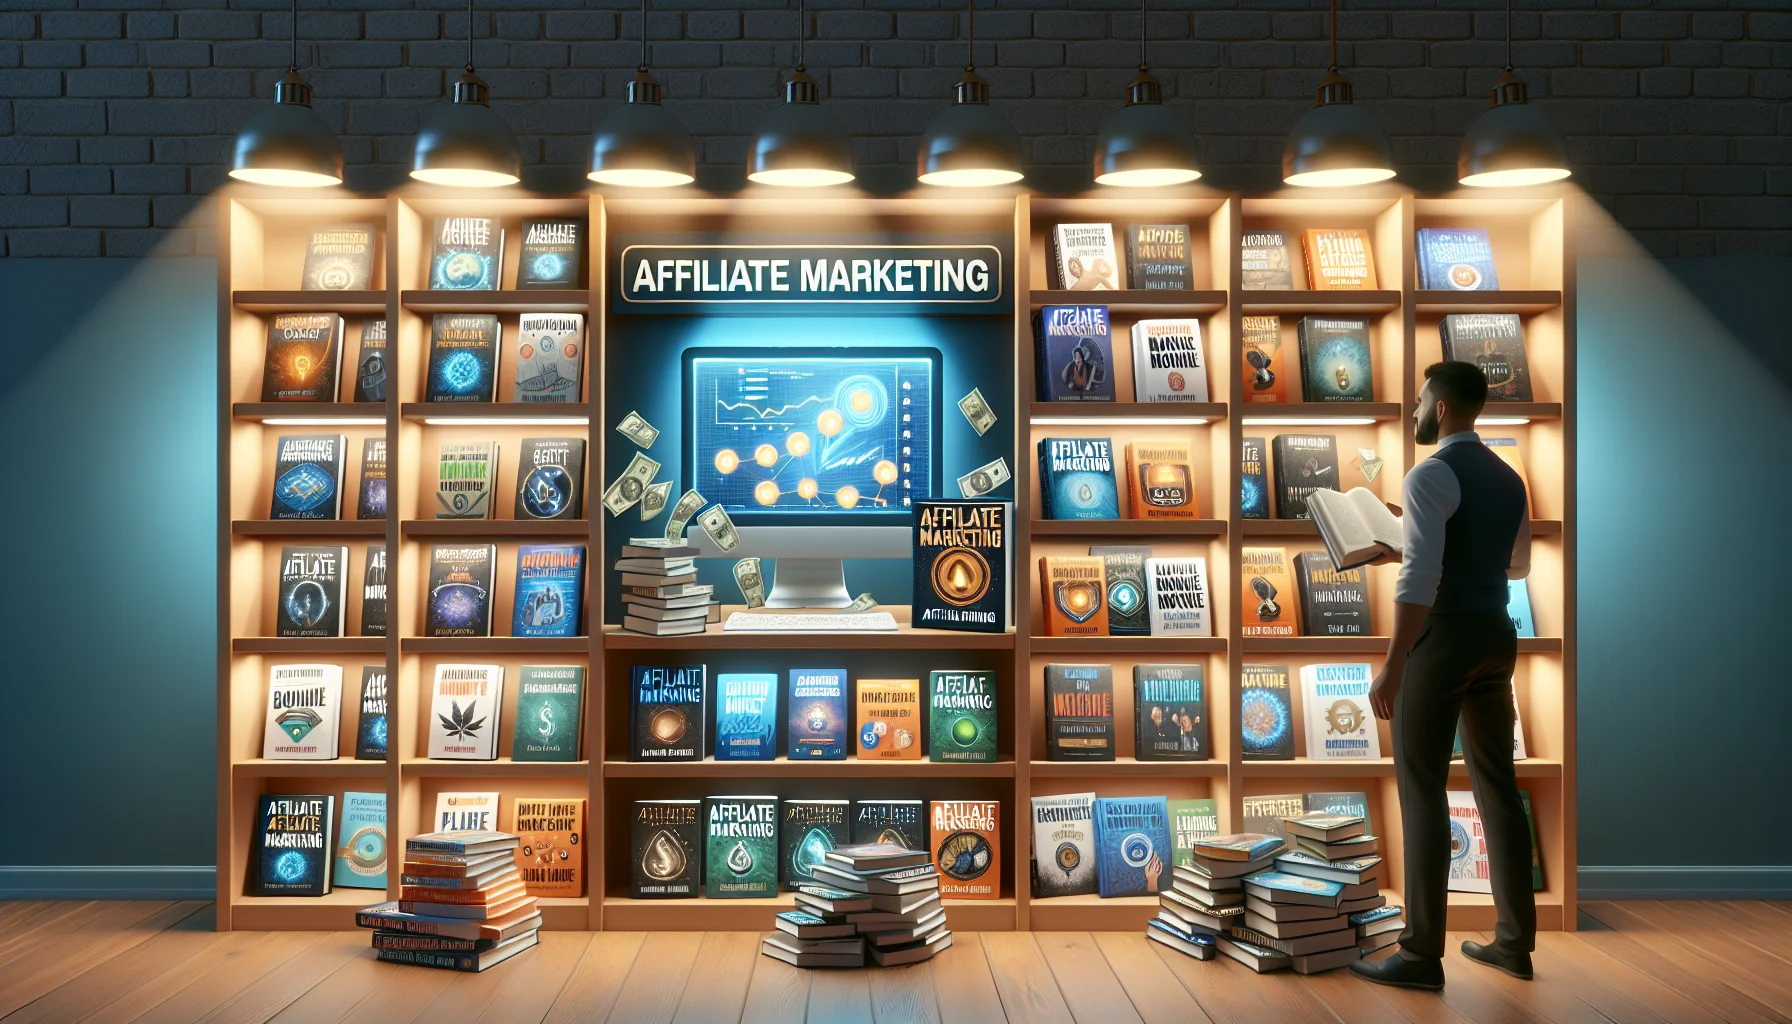 Imagine an aesthetically pleasing bookstore with realistic illumination. The shelves hold an impressive array of books, focused mainly on 'Affiliate Marketing' capturing the spotlight. Each book cover is different, but all of them captivating enough to be instantly recognized as top resources for affiliate marketing. They are creatively designed with engaging graphics related to making money online. Elements include dollar signs, a computer screen showing impressive sales graphs, and symbols of popular eCommerce platforms. A jovial shopkeeper of Hispanic descent is arranging them in a way to entice the customers. The overall ambiance perfectly conveys the potential profitability of affiliate marketing.